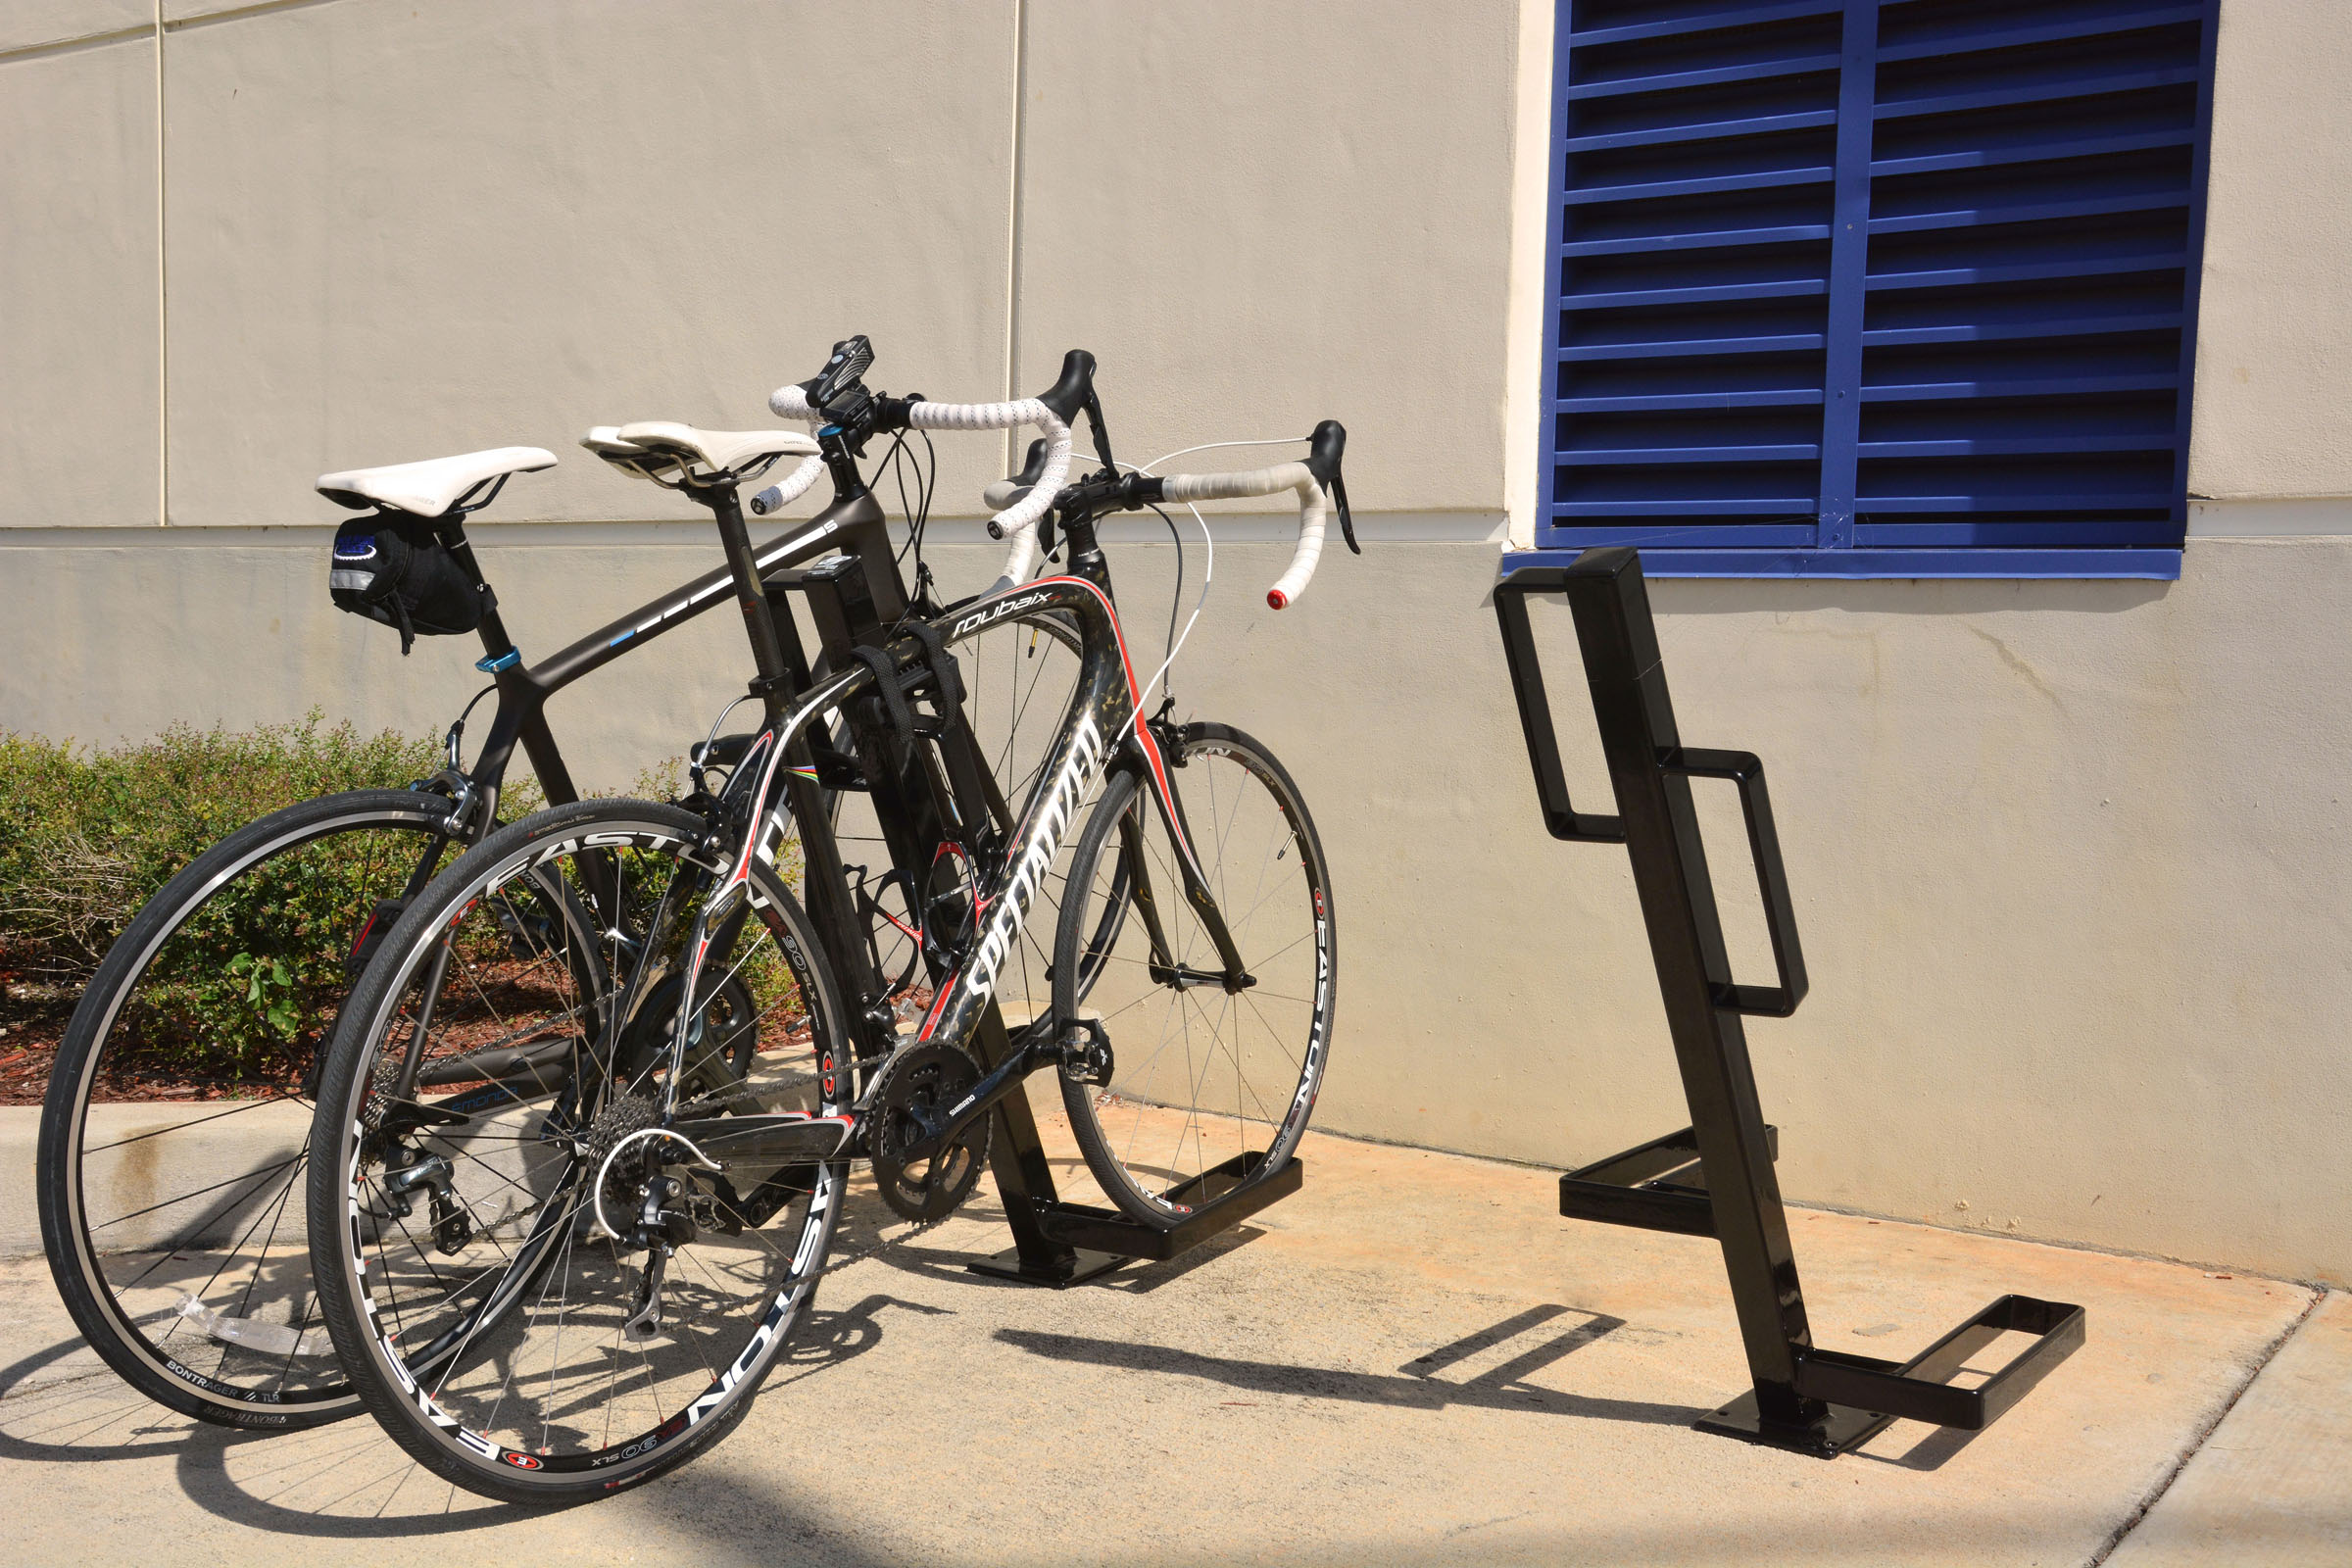 UpLift Bike Docks - the NEXT Big Advancement in Bicycle Parking with a Smaller Footprint and Better Security